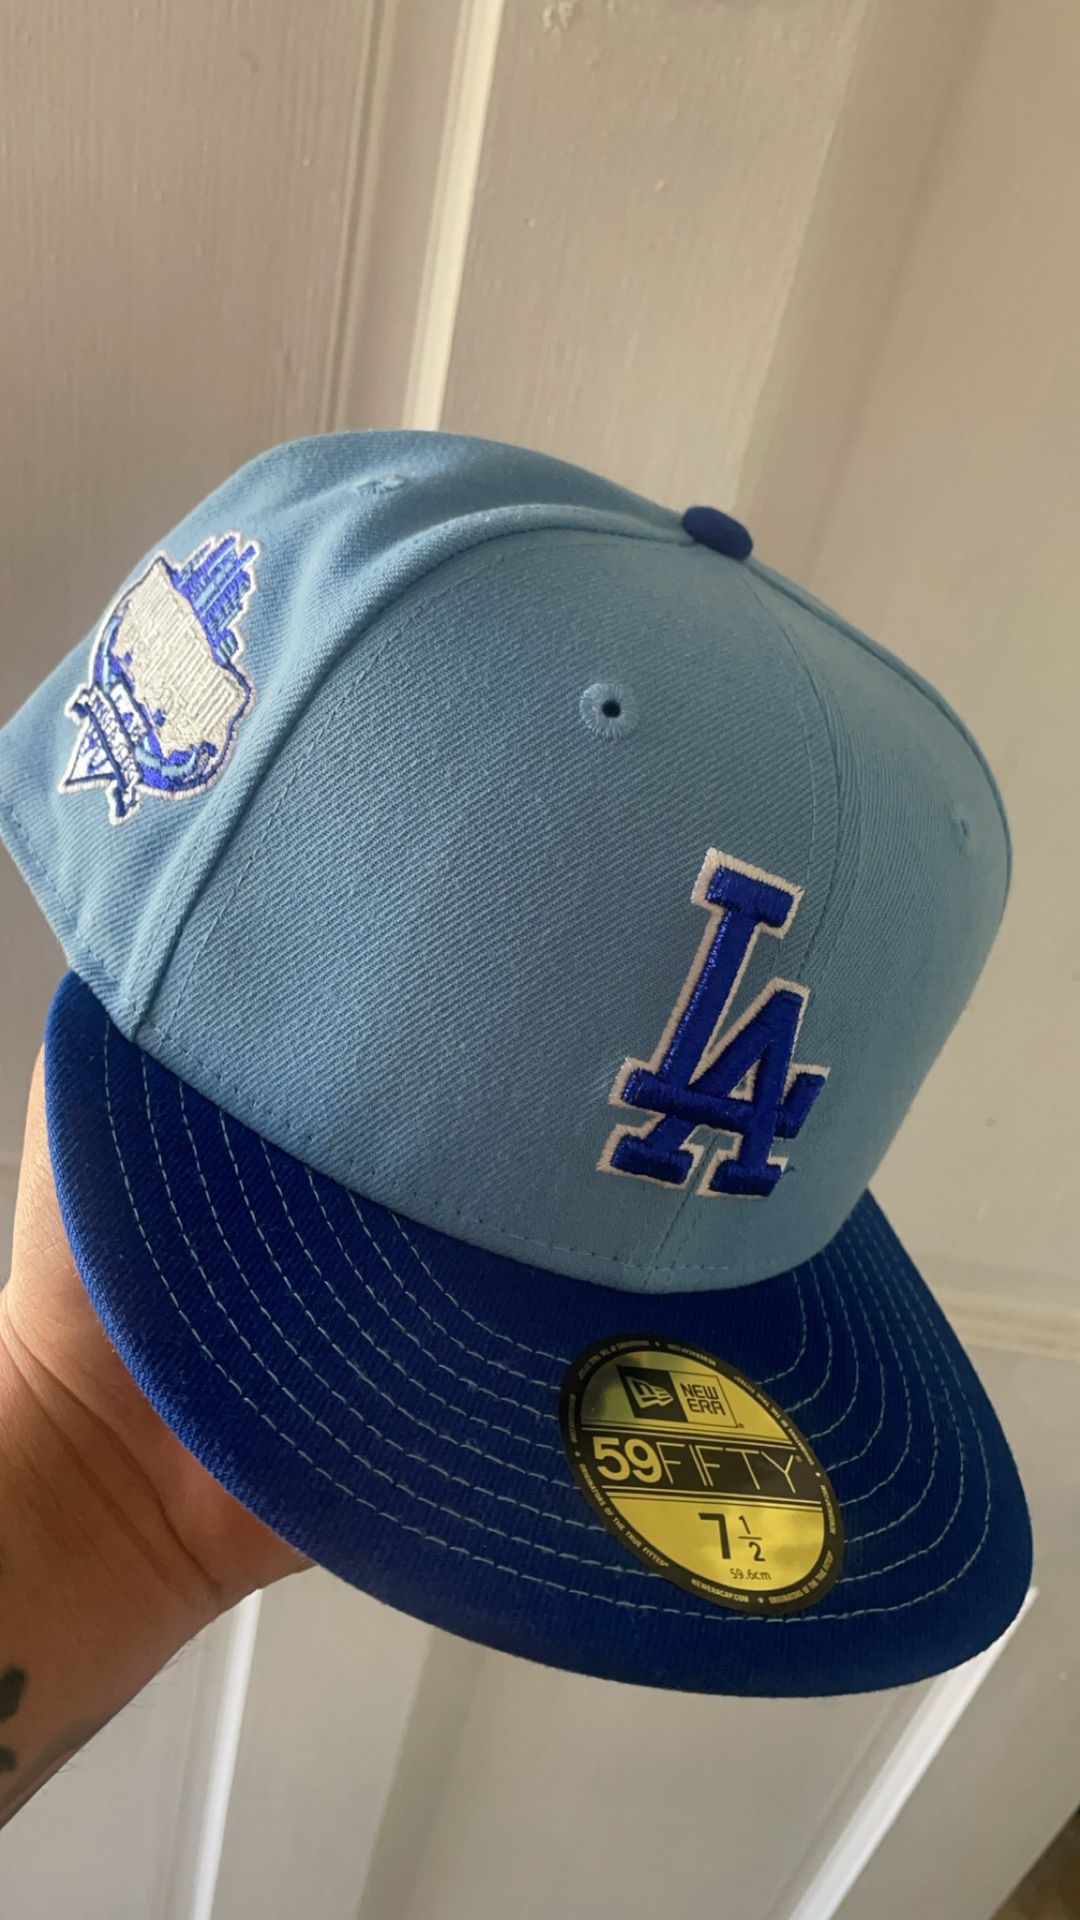 LOS ANGELES DODGERS 40TH ANNIVERSARY "VISOR STITCH" NEW ERA FITTED